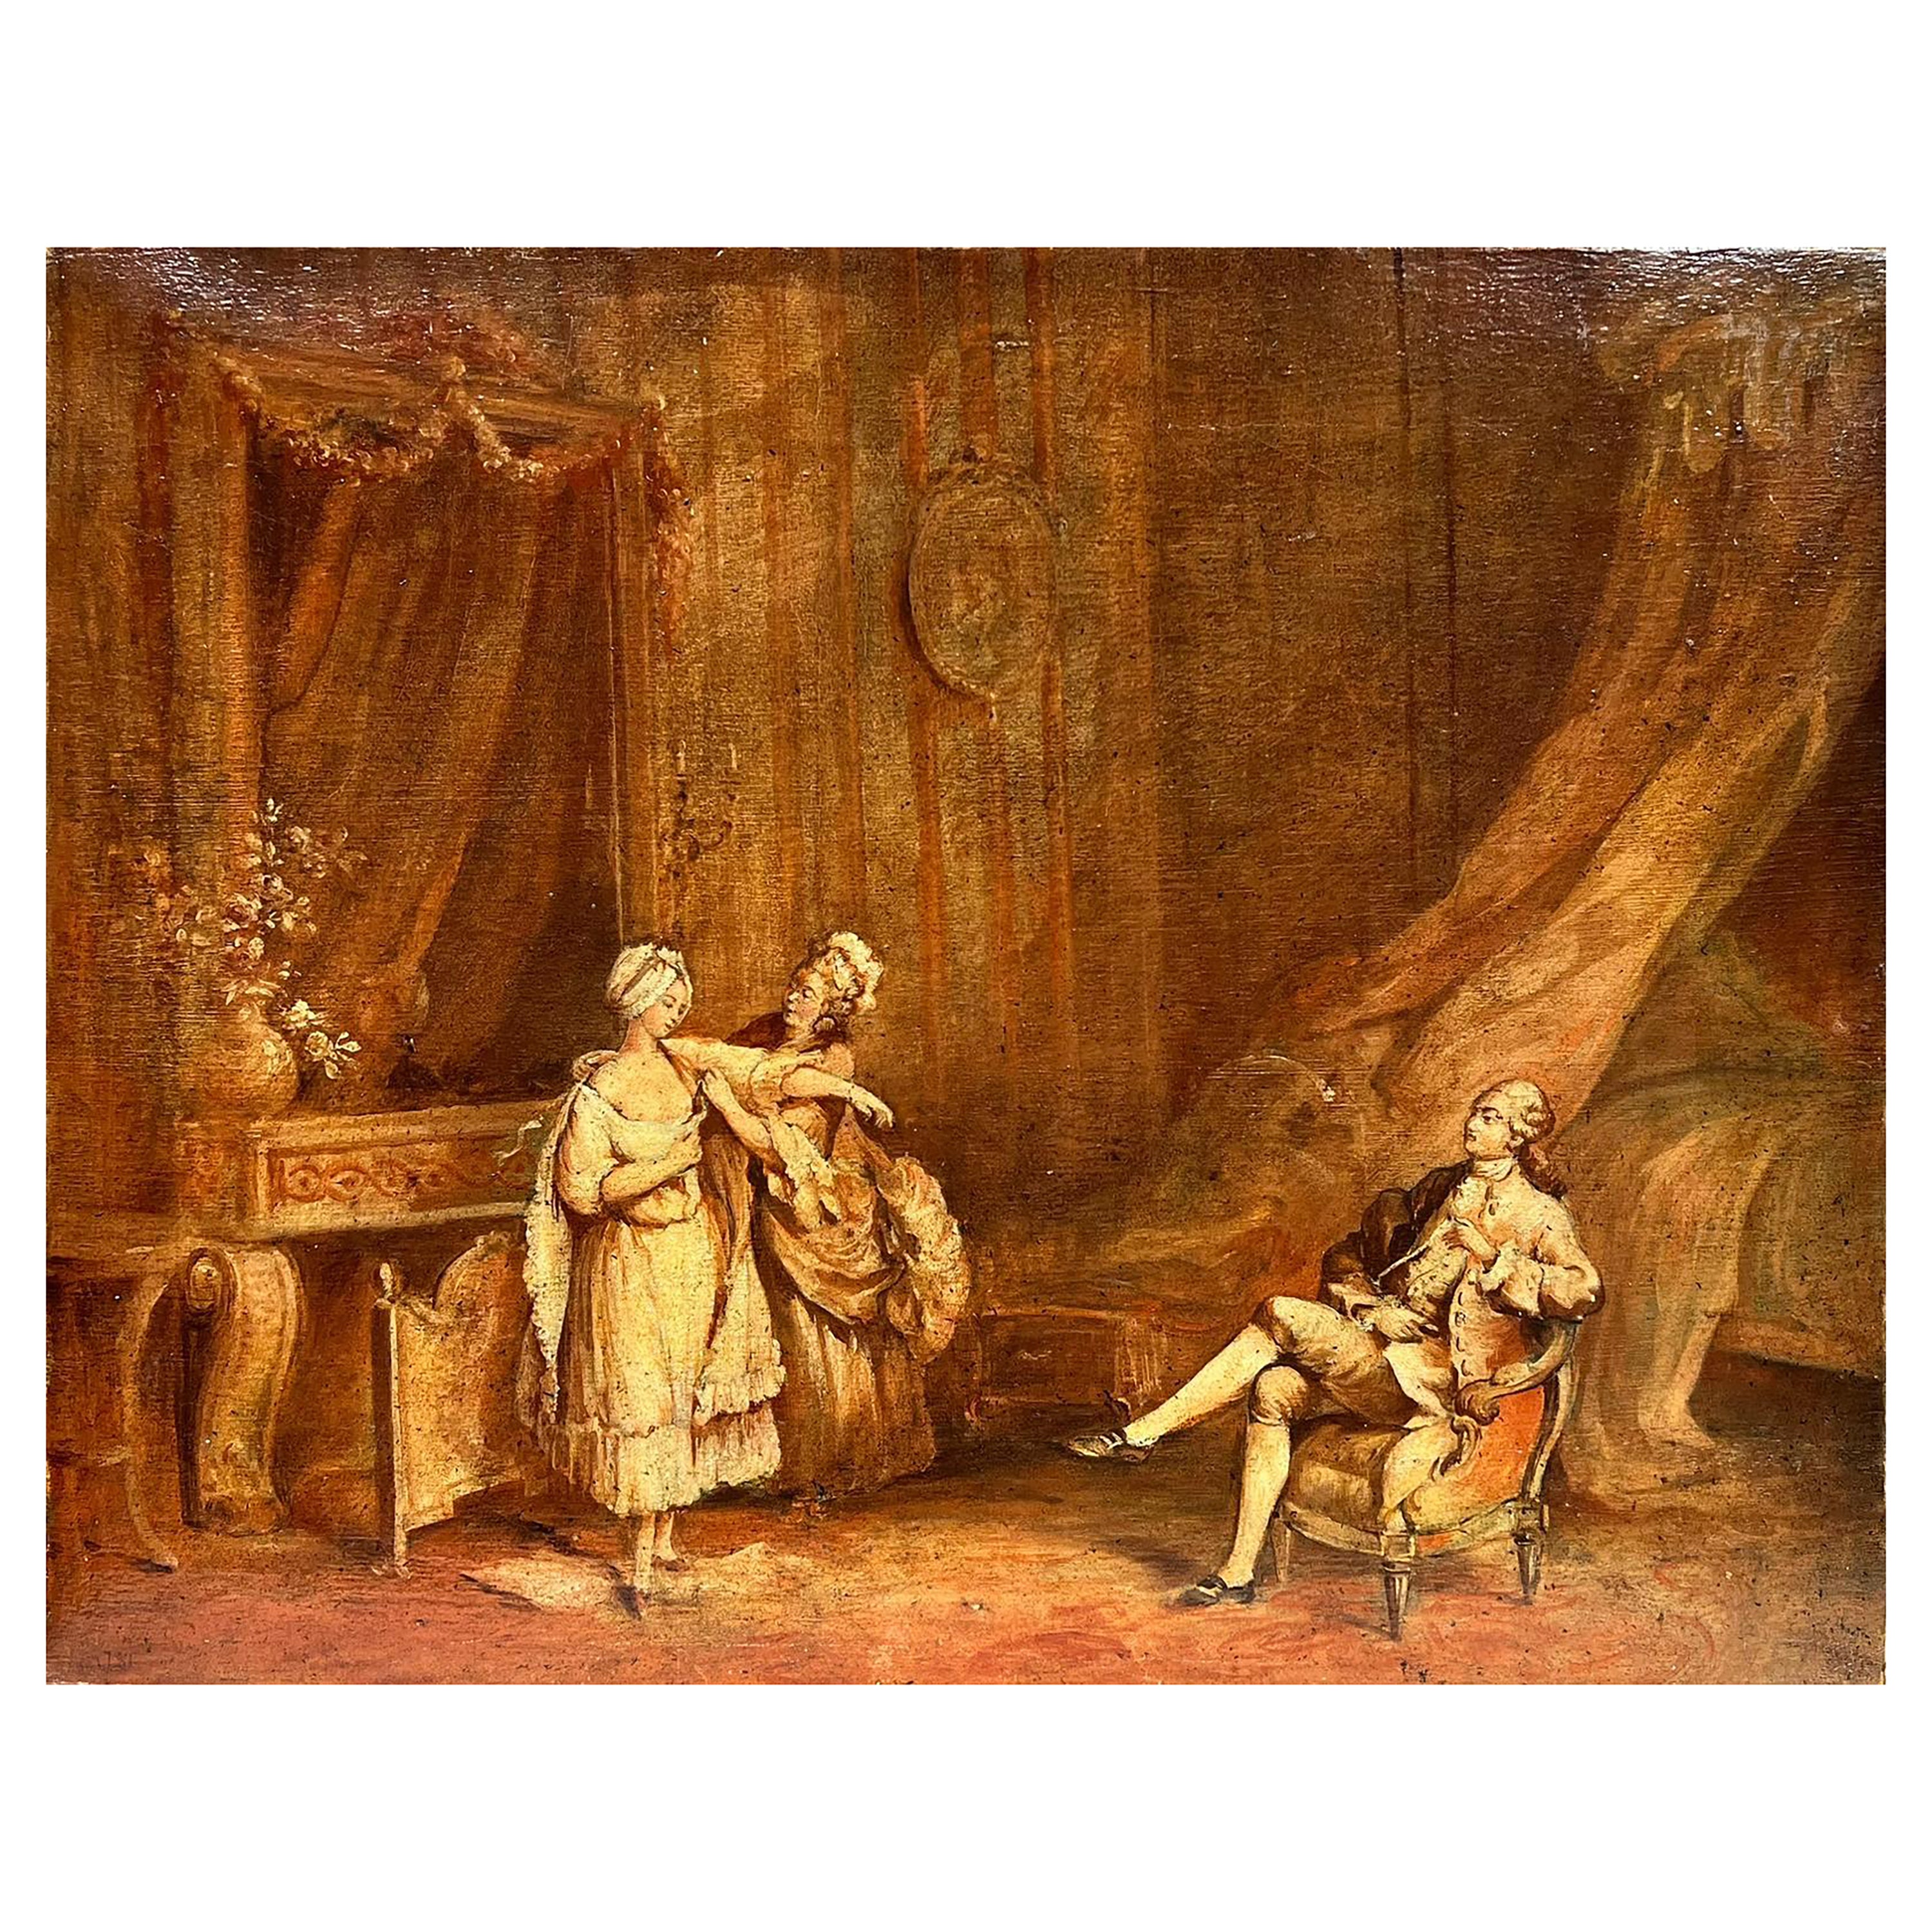 French Rococo Interior Painting - 1800's French Oil Painting Elegant Rococo Period Interior Figures Lady Dressing